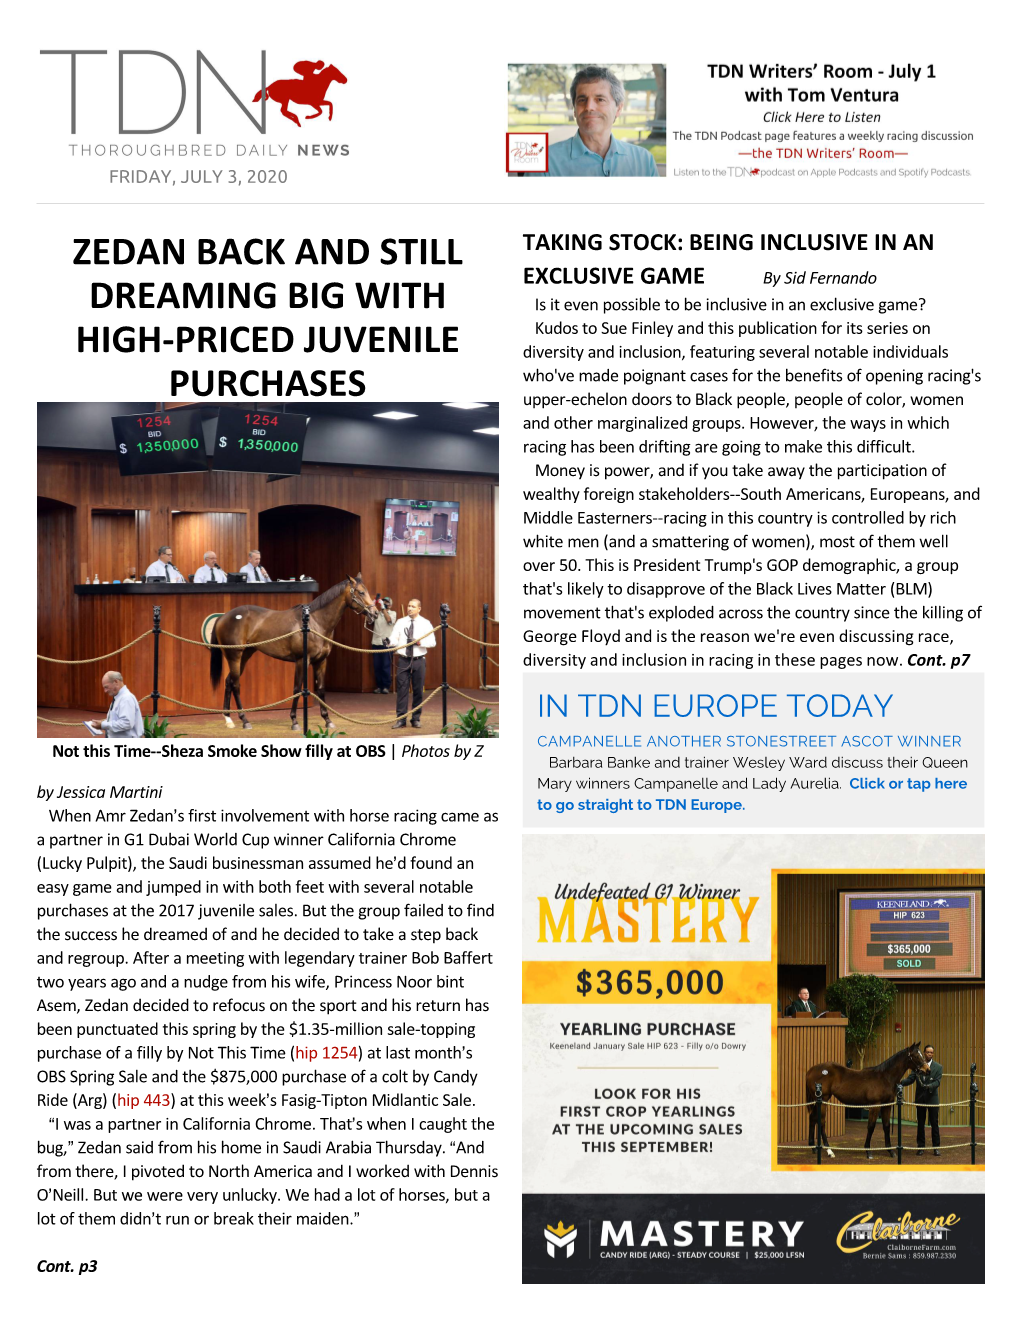 Zedan Back and Still Dreaming Big with High-Priced